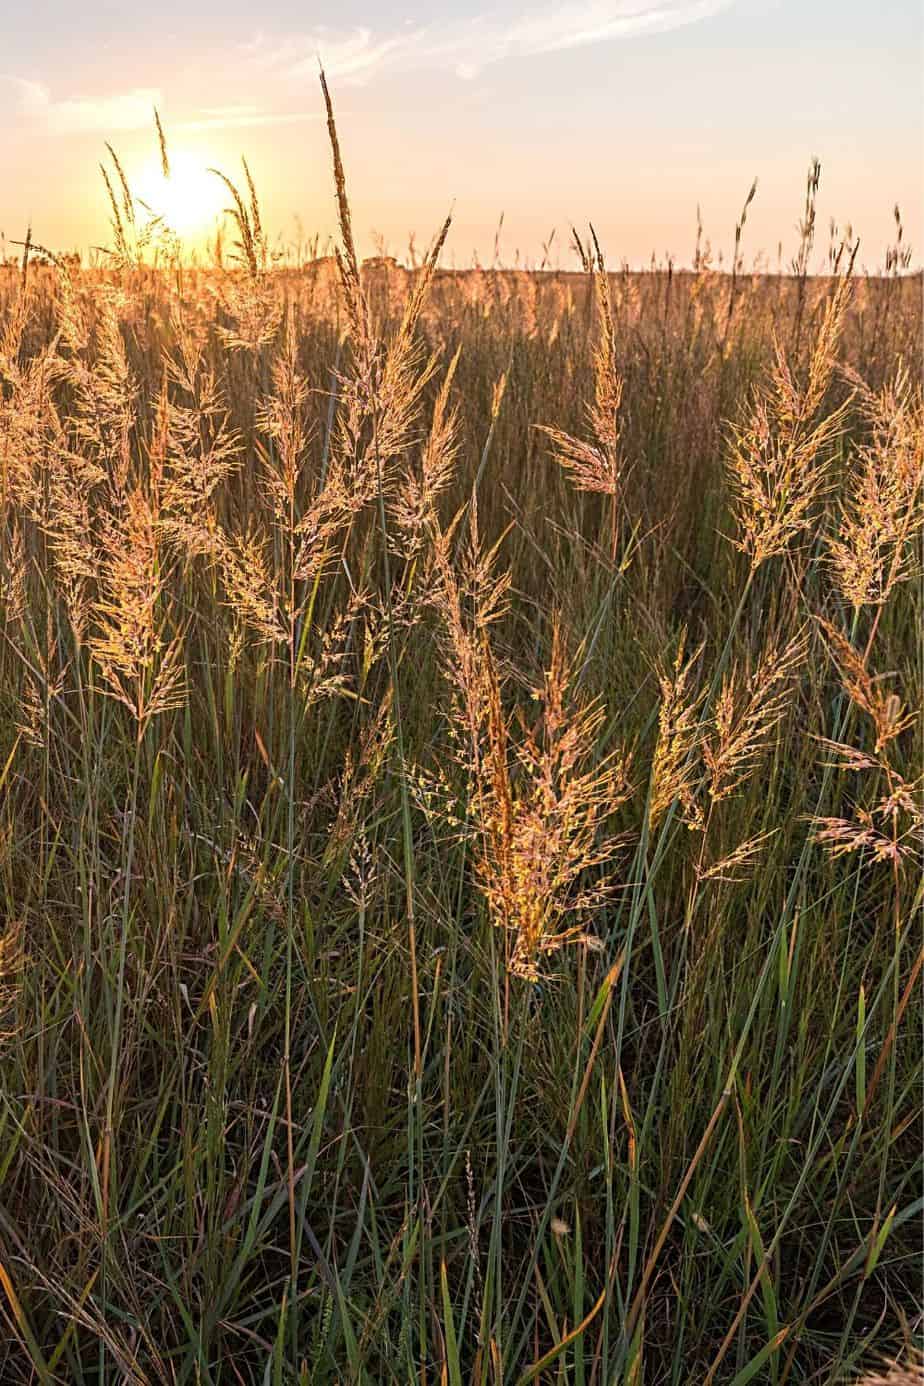 Yellow Indiangrass can grow up to 3 feet tall and provide privacy to your garden or balcony